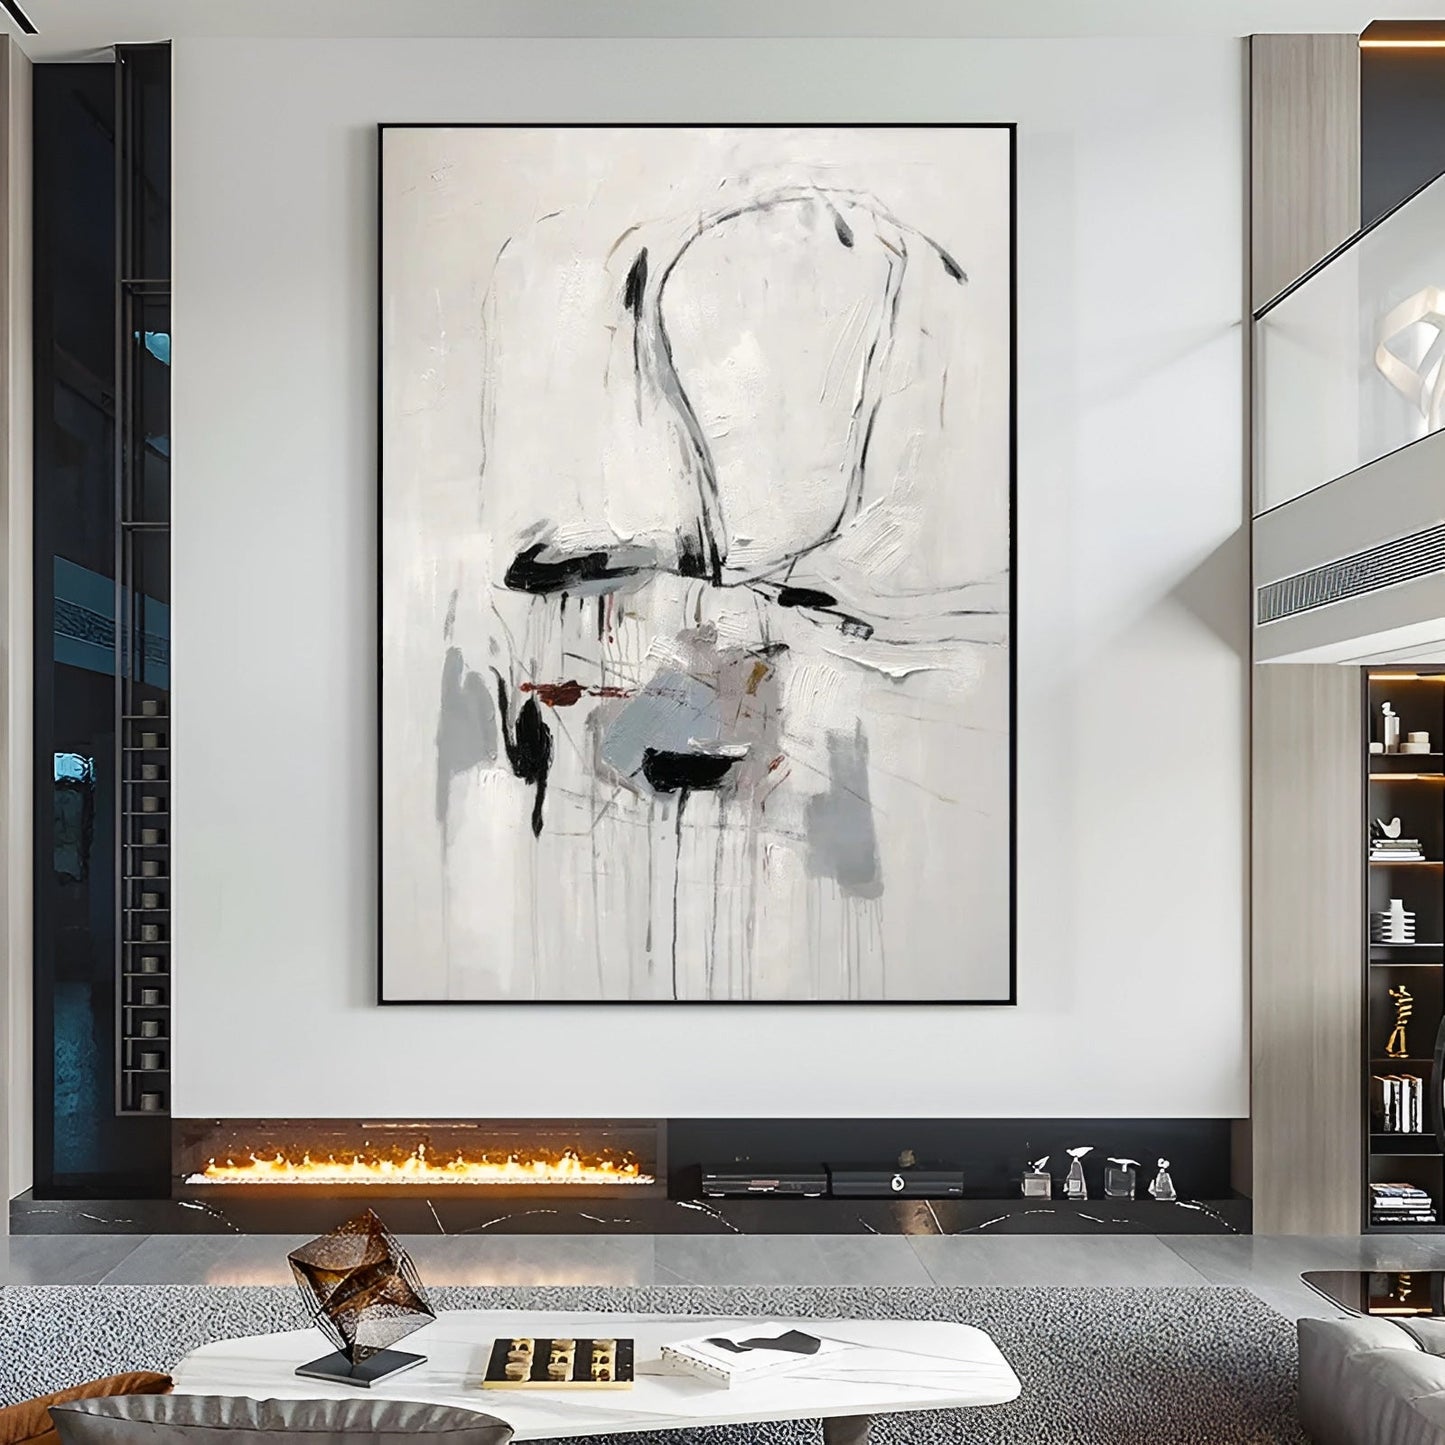 Ultra-modern - Large Contemporary Black and White Canvas Art Painting